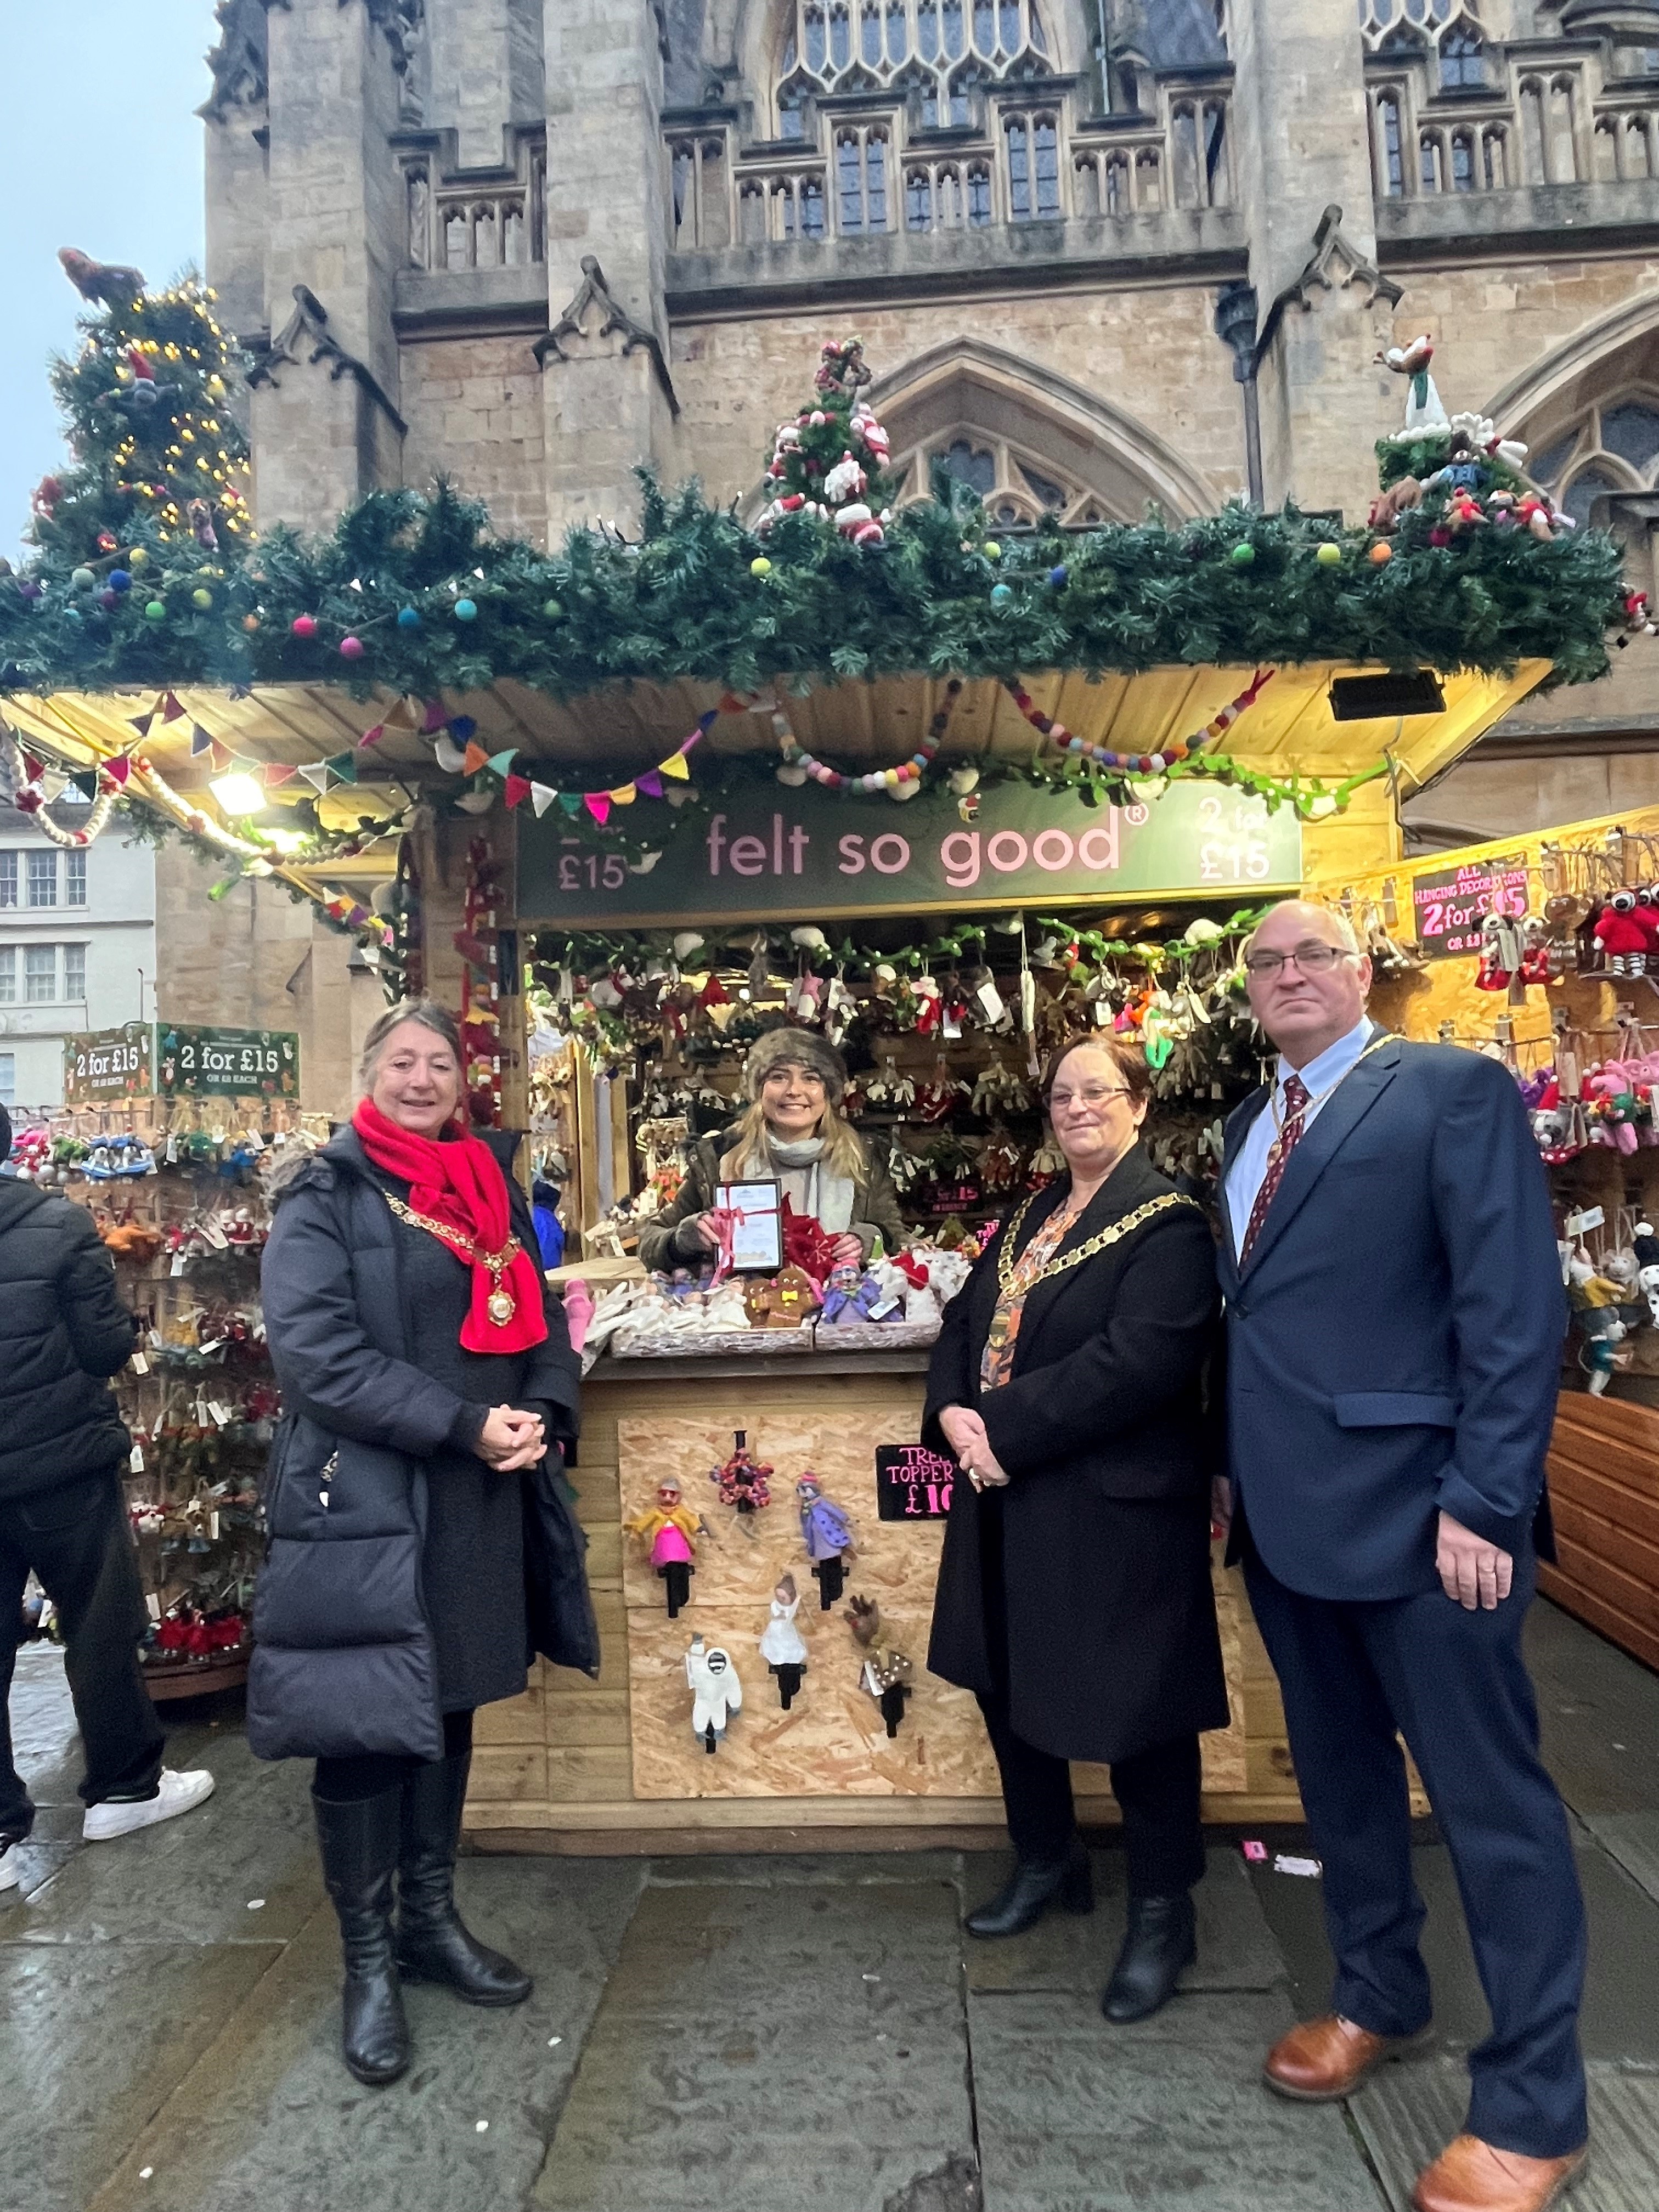  Pictured are the the Best Dressed Chalet traders with Councillor Dine Romero, Mayor of Bath, The Chair of Bath & North East Somerset Council, Councillor Sarah Moore and the Chair's escort Shaun Moore.  